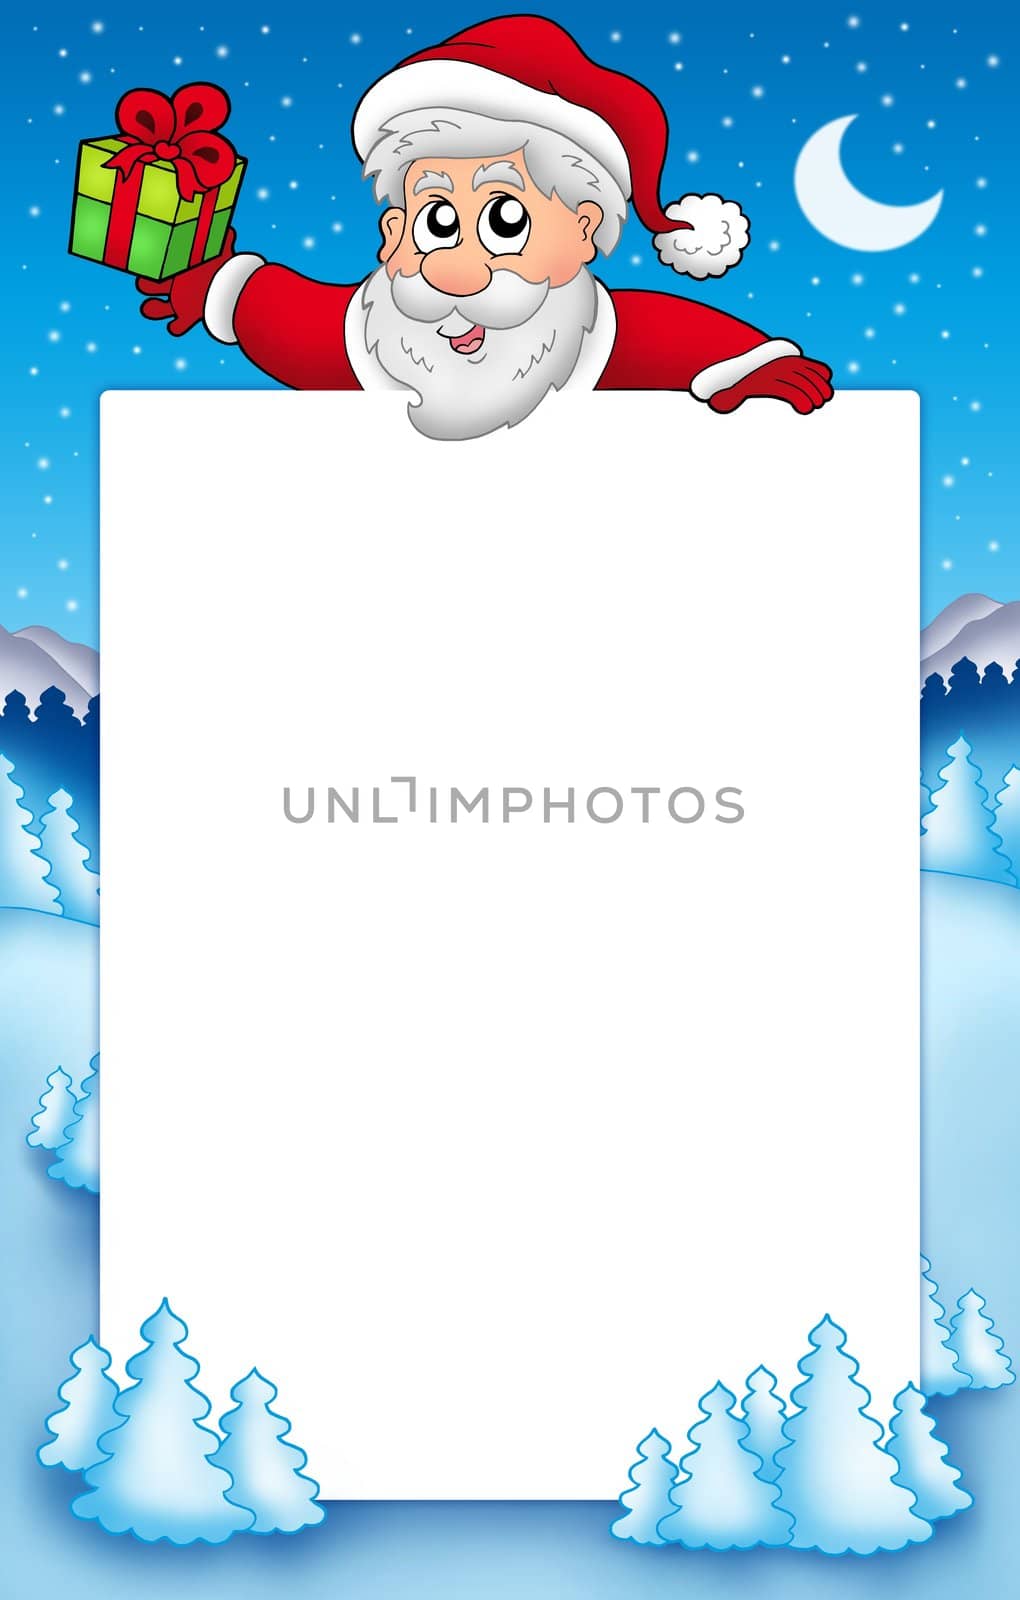 Christmas frame with Santa Claus 5 - color illustration.